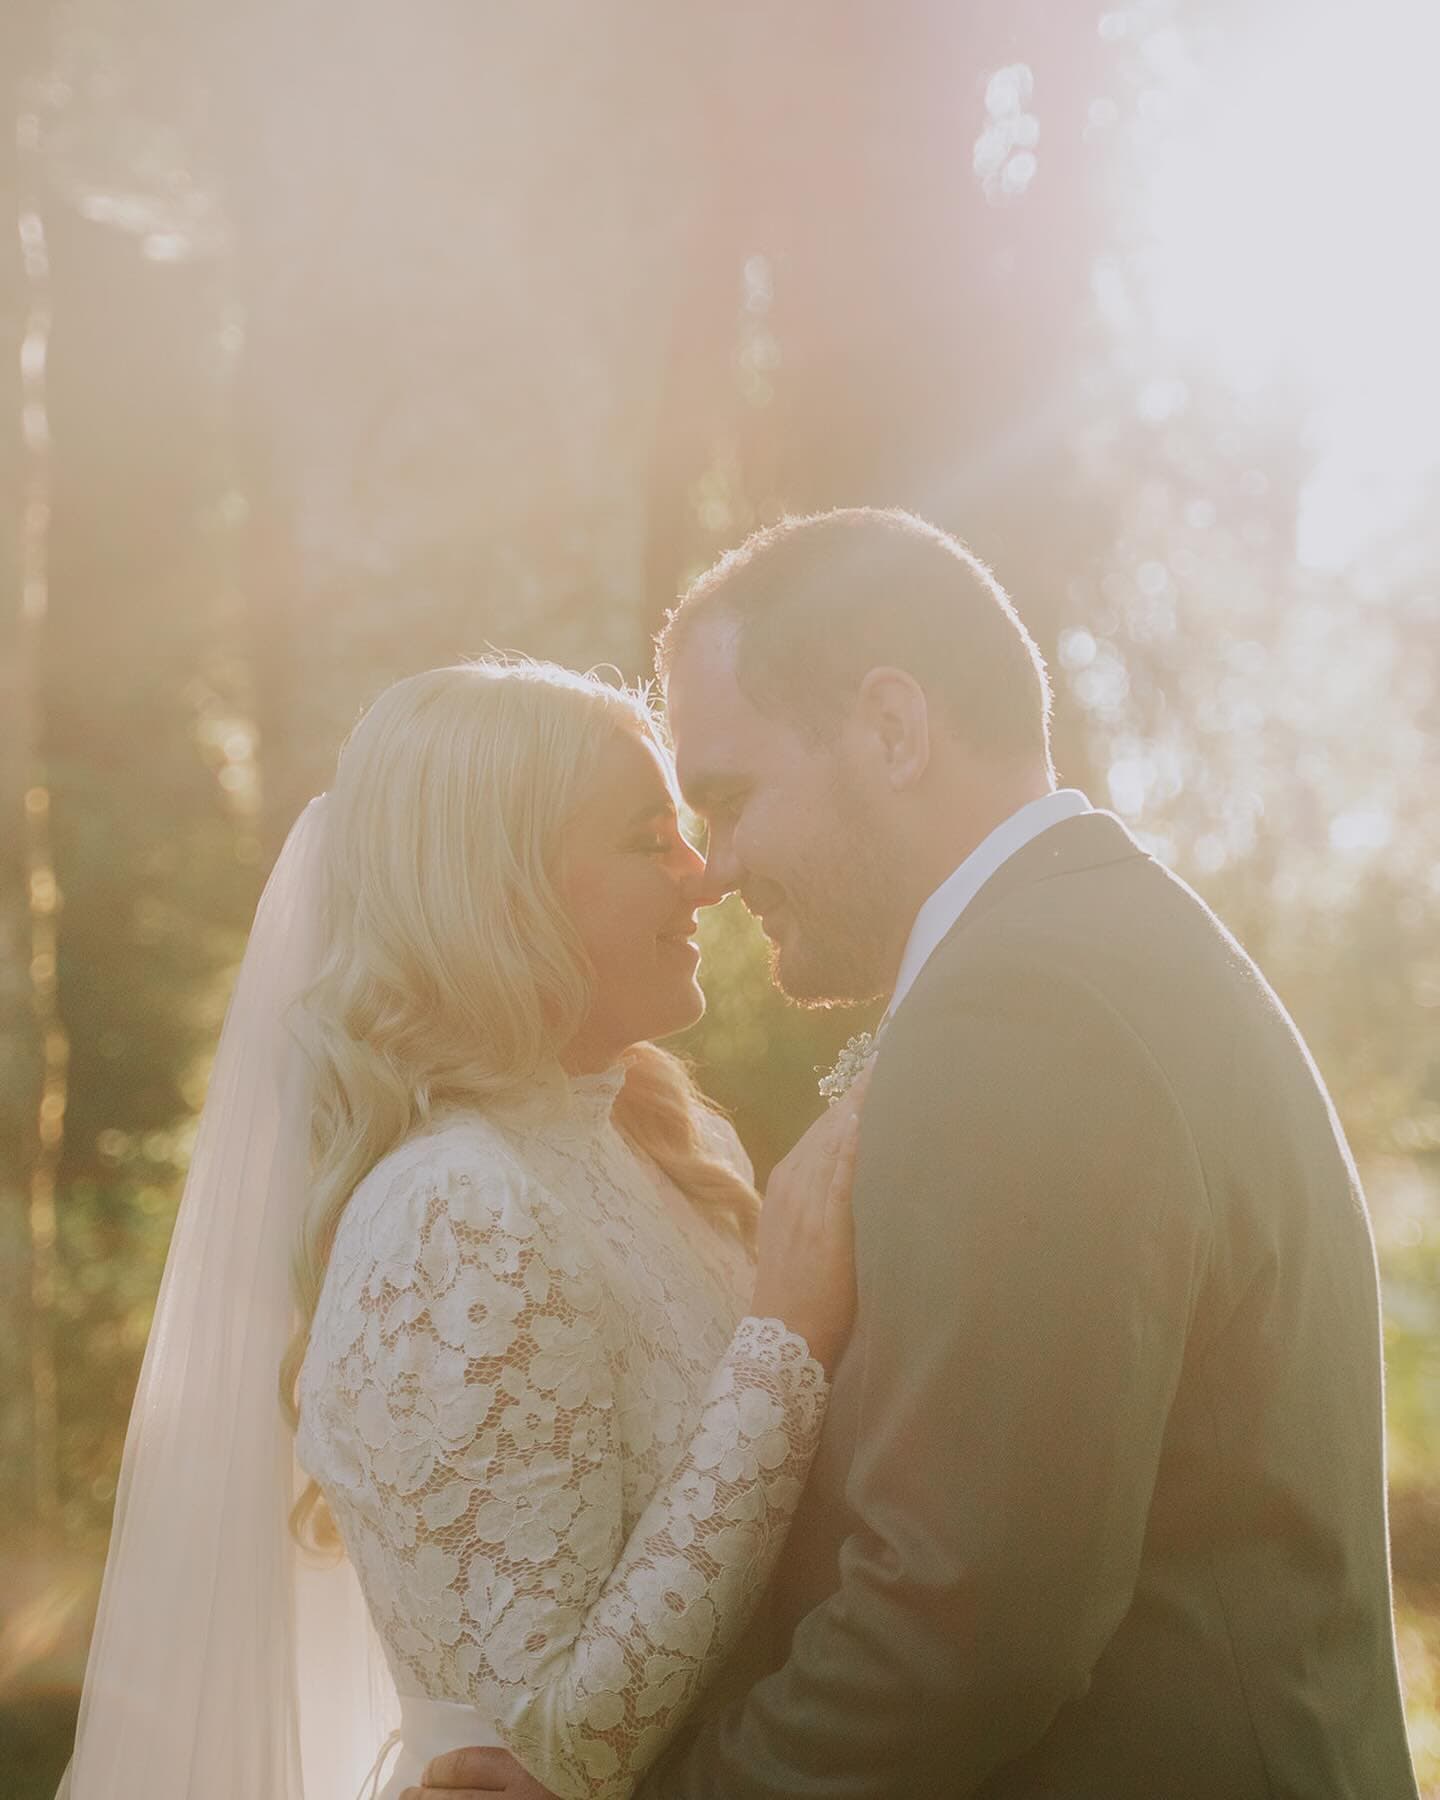 An Enchanting Spring Wedding in the Victorian Countryside: The Story of Natalie & Tim